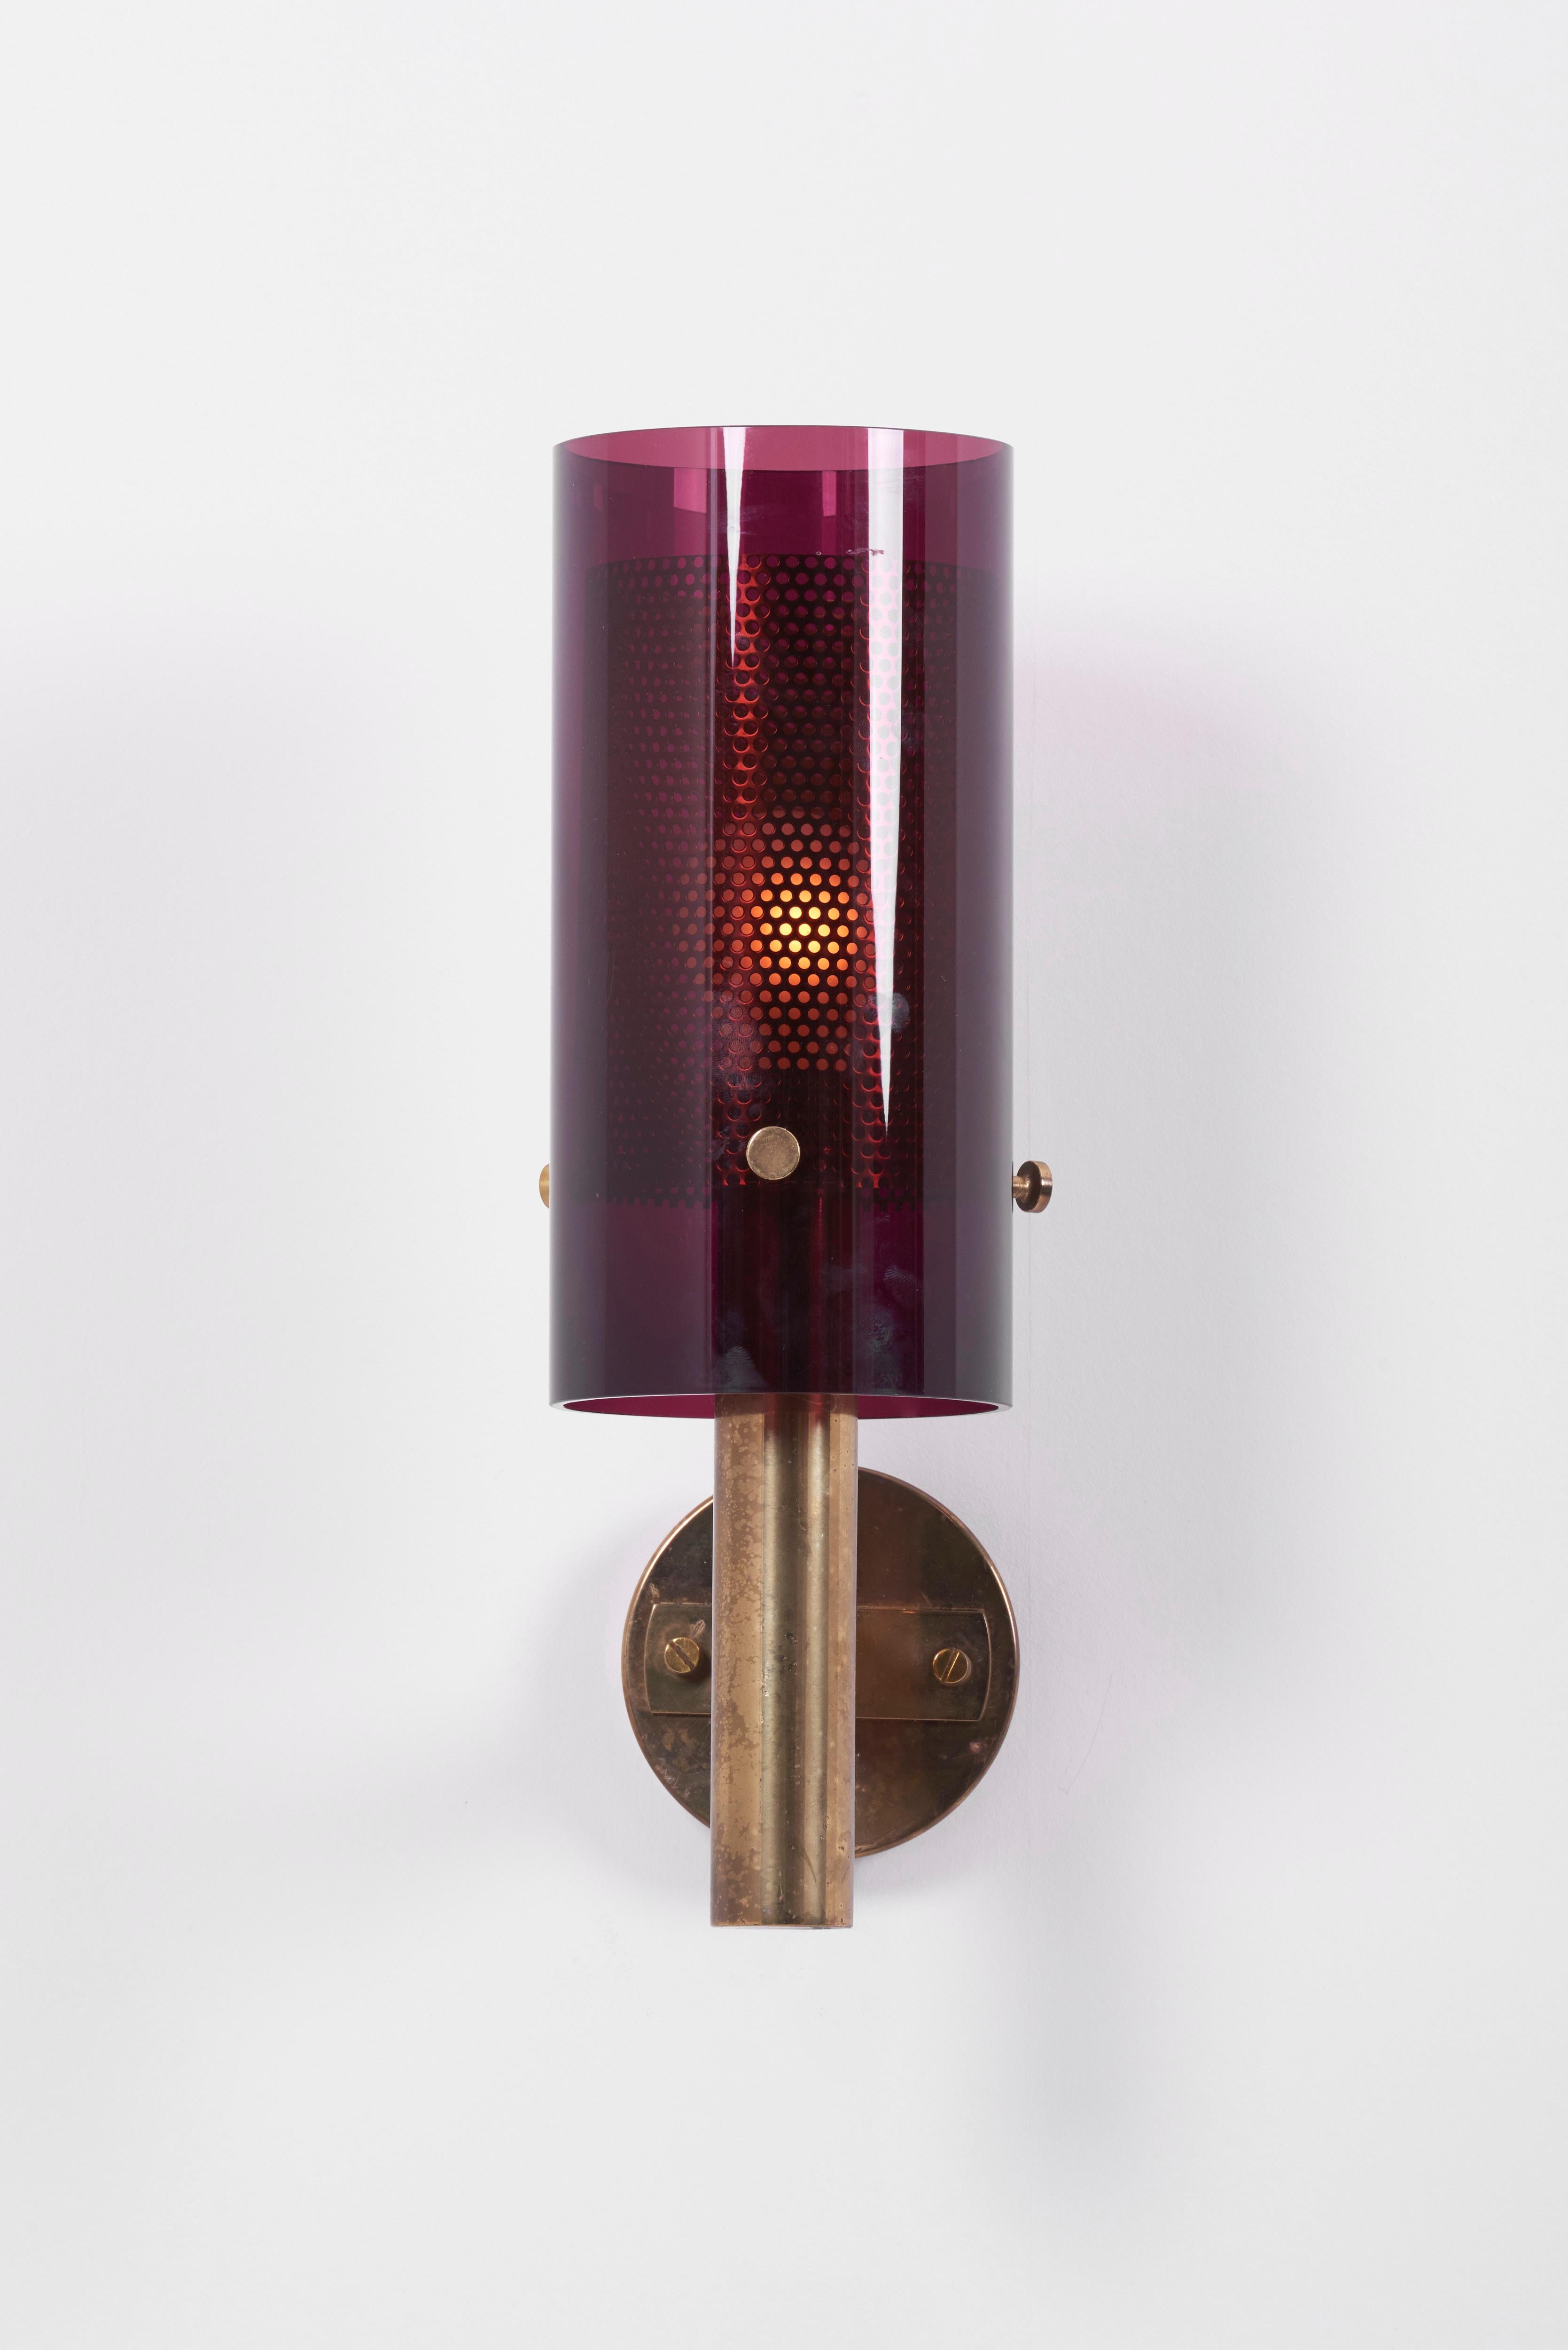 Rare pair of wall lamps, model V-147, designed by Hans-Agne Jakobsson for Hans-Agne Jakobsson AB in Markaryd, Sweden, labeled.
Brass base and purple tinted glass with perforated sheet inside, fixed by three screws each.
Original condition with